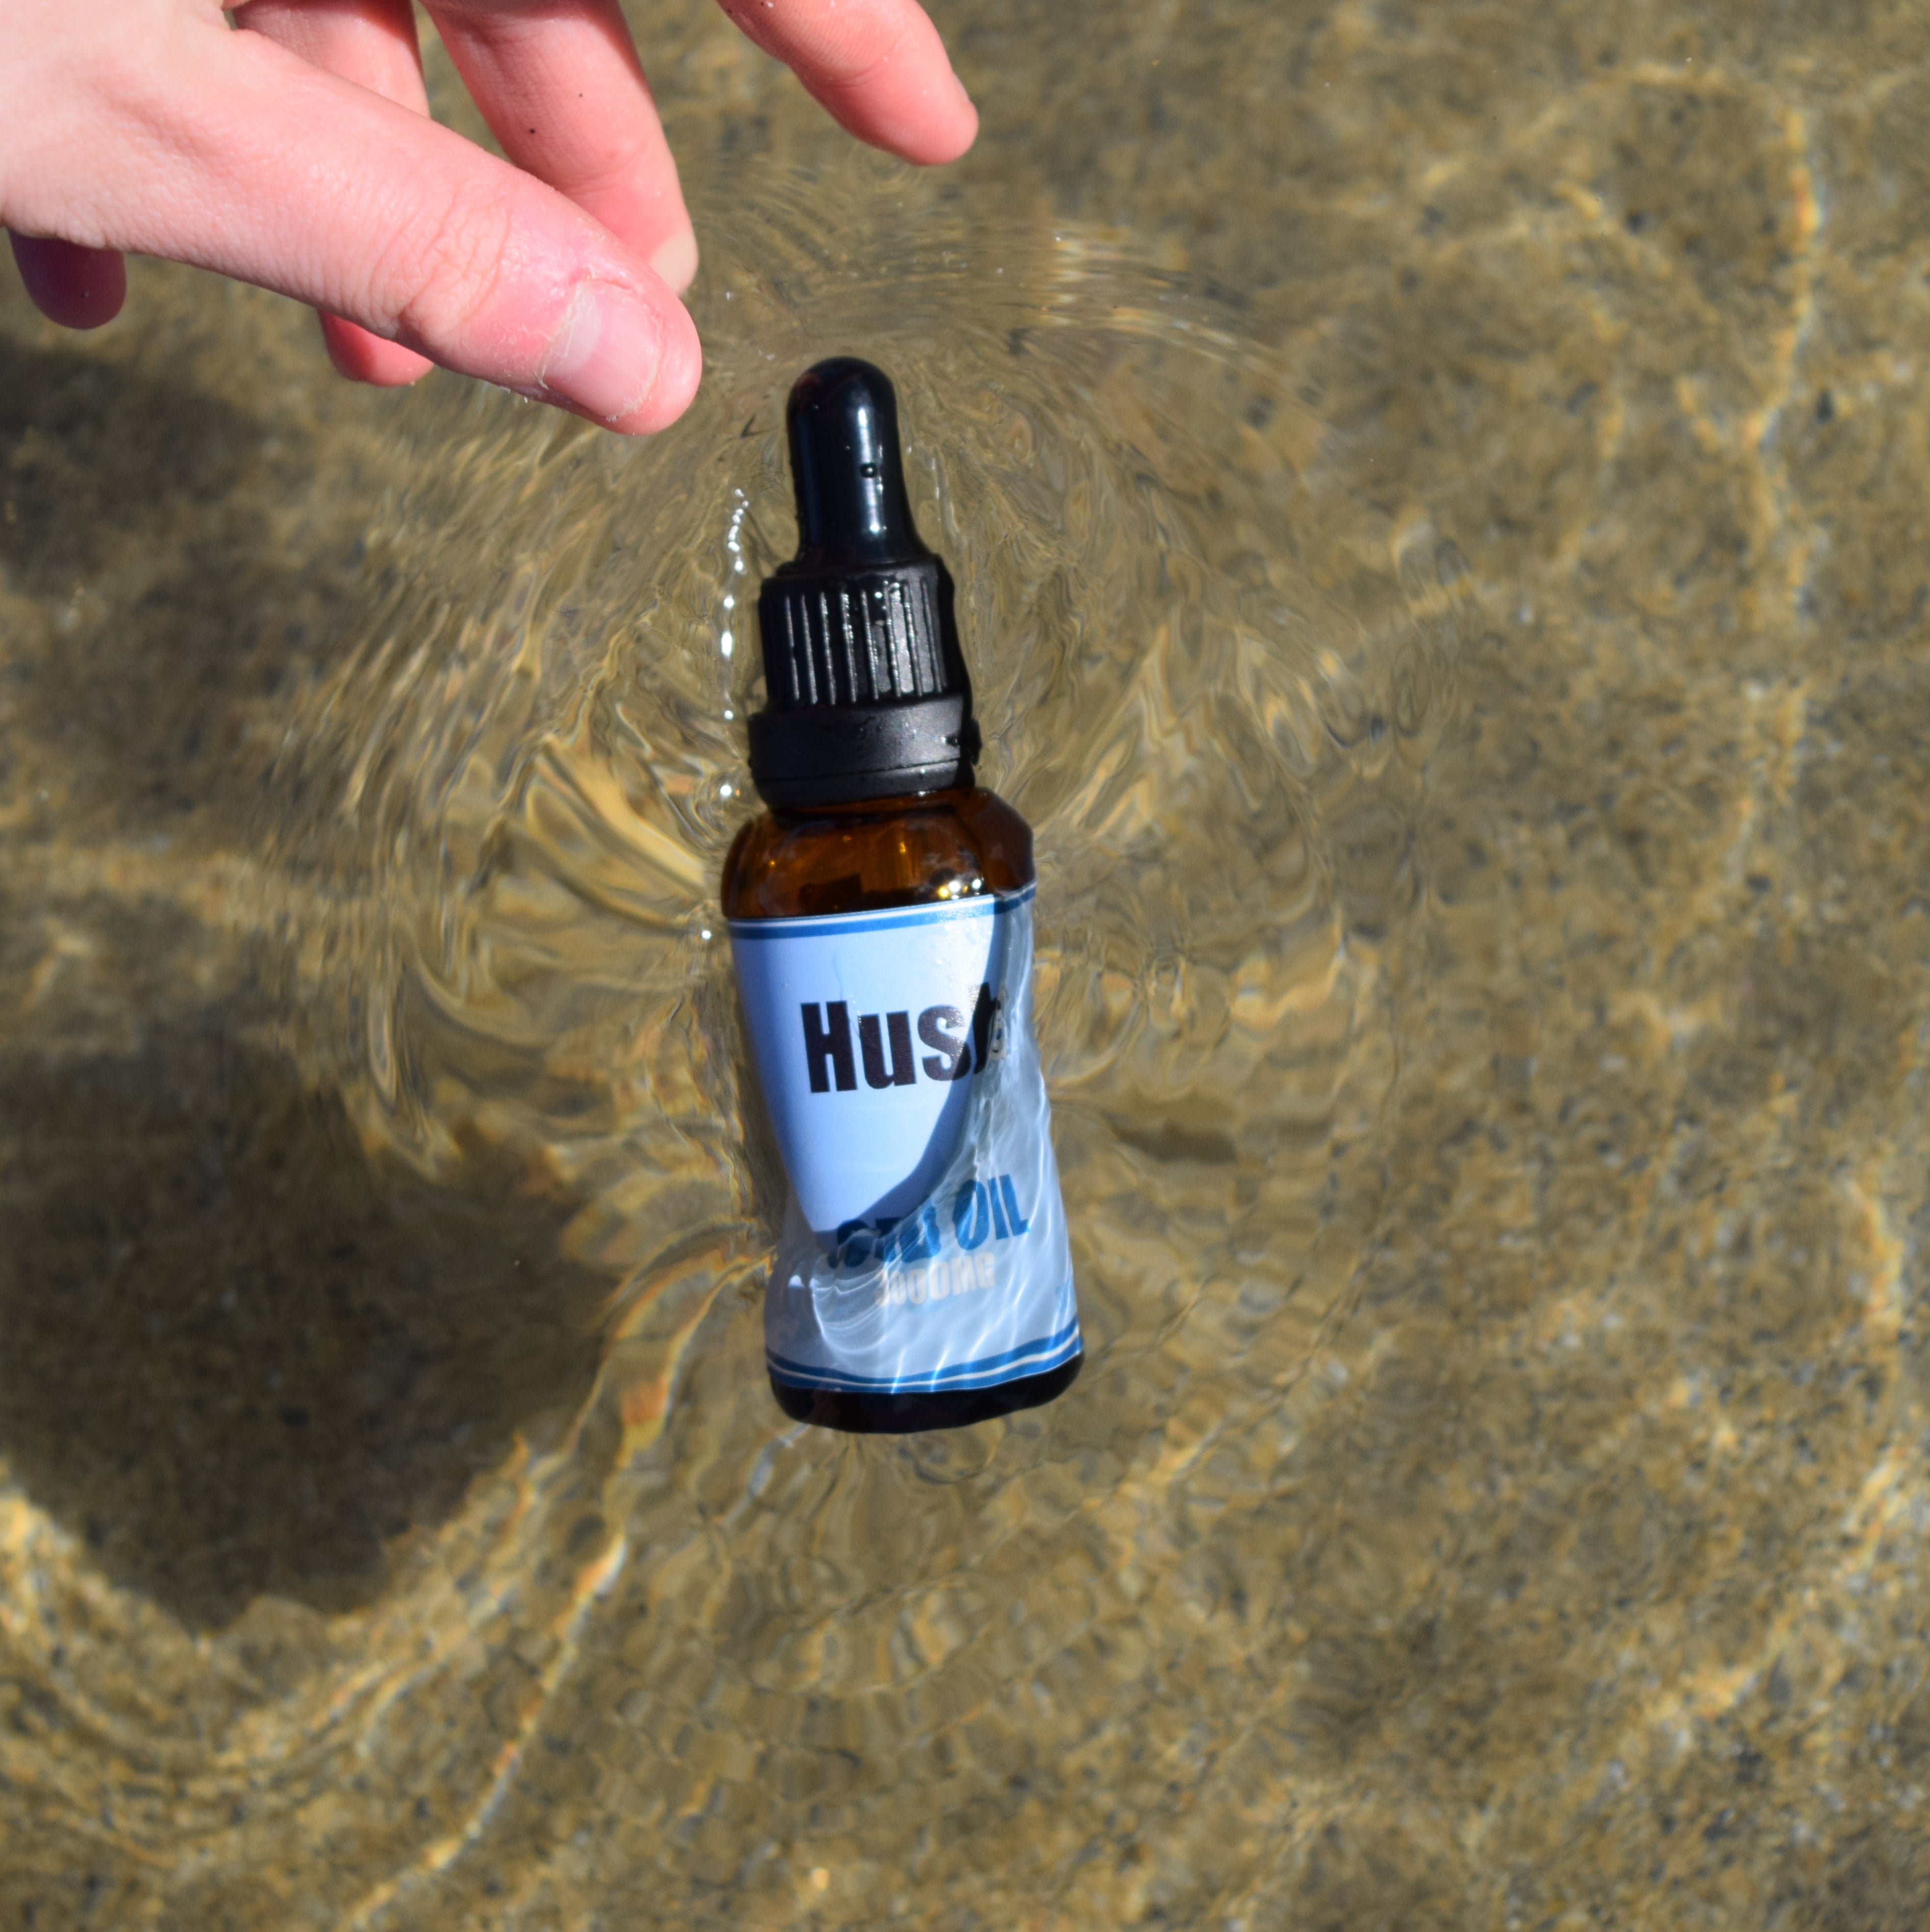 Hush CBD oil, High strength, high quality CBD oil. We travel around Cornwall's amazing markets selling our high quality products. All our CBD oils are manufactured in the UK and all other products are hand crafted in Dorset and Cornwall by professionals. 